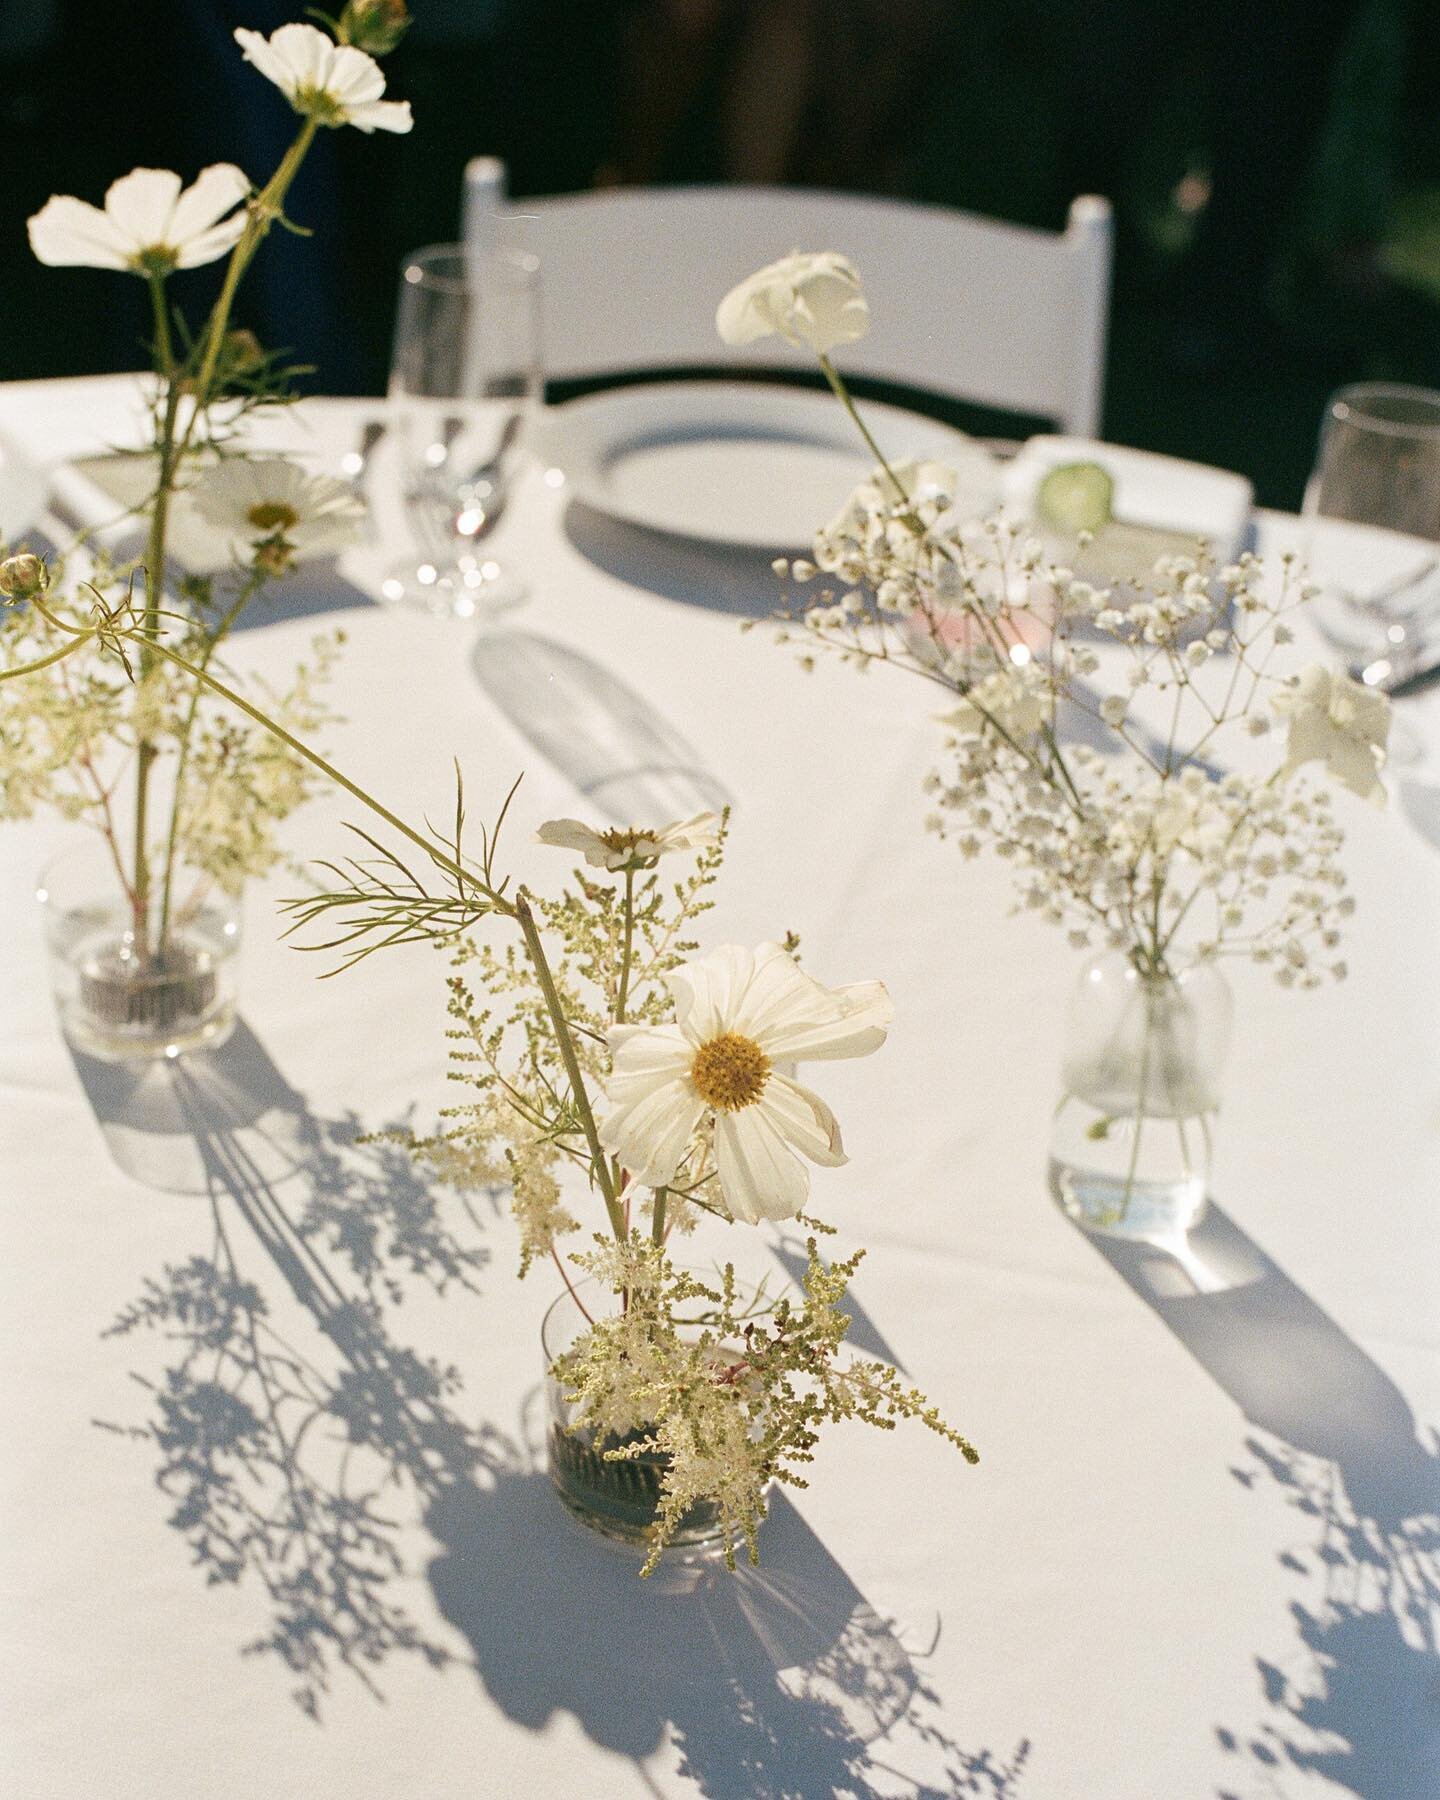 Dreaming of summer dinner parties on film 🤍 shot by J for our friend @annapeter_s